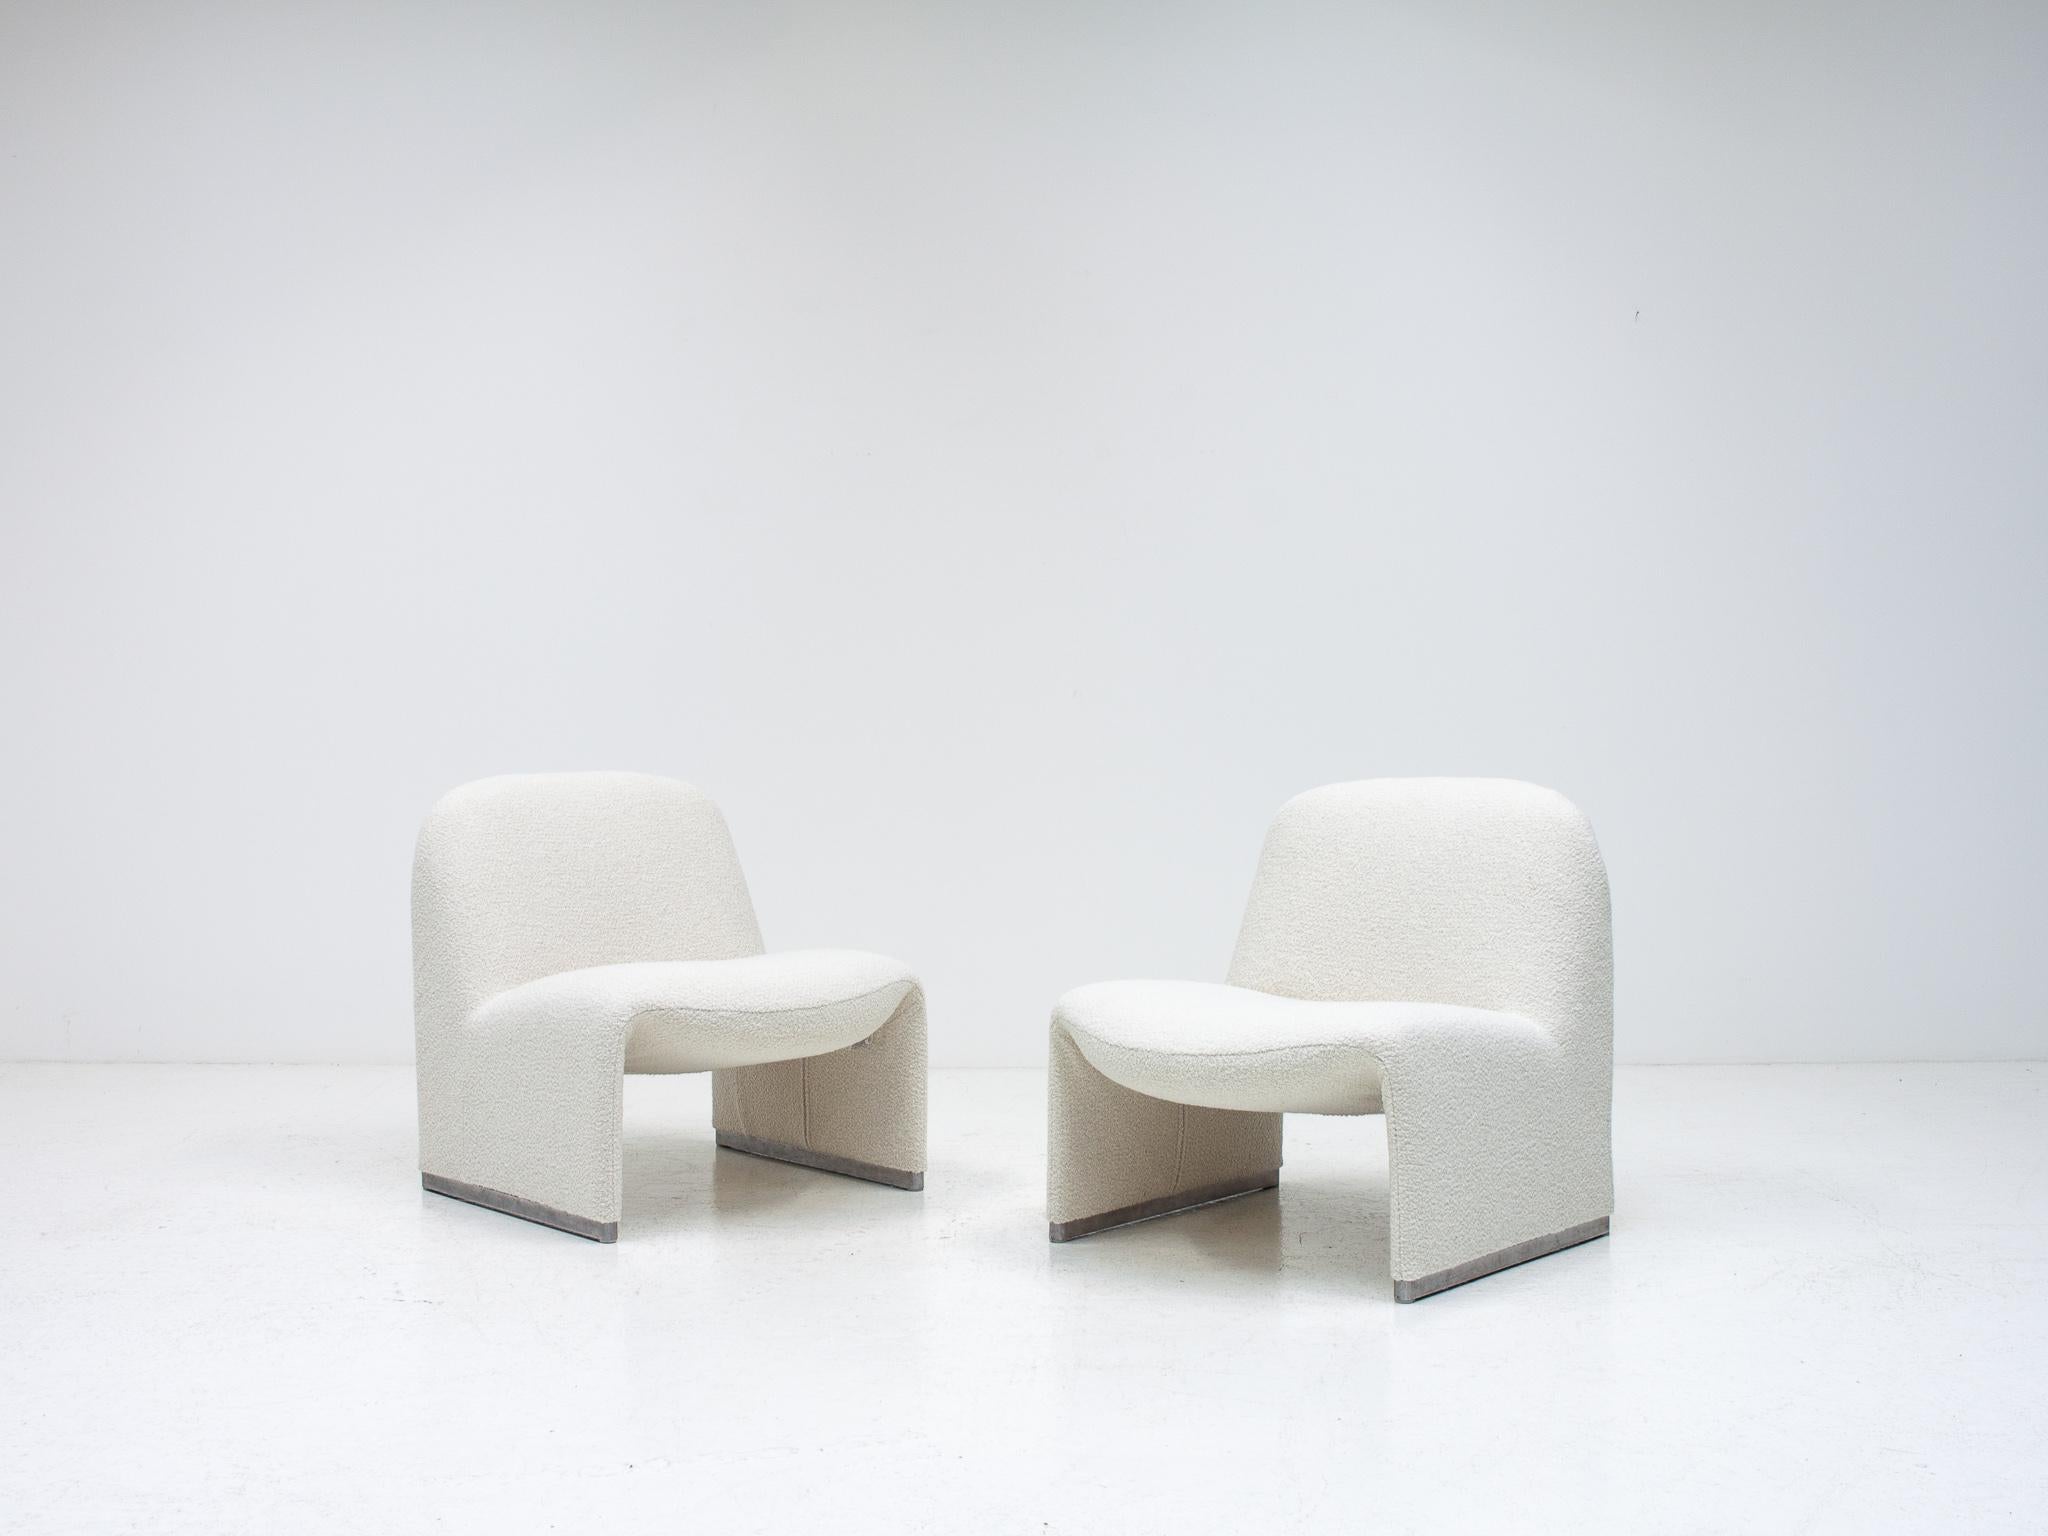 Dutch Giancarlo Piretti “Alky” Chairs In Yarn Collective bouclé *Customizable* For Sale